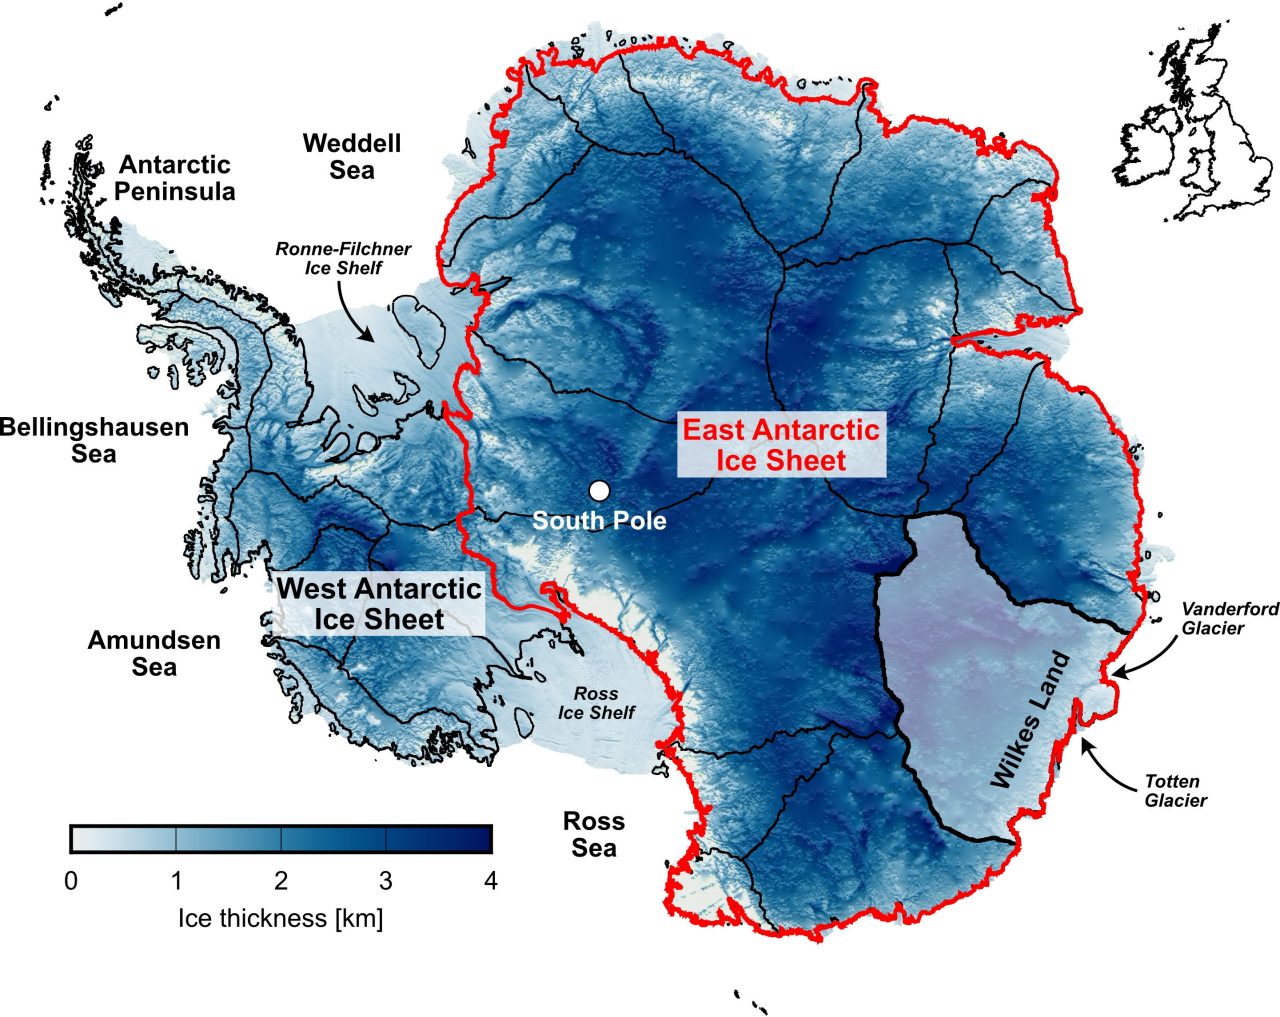 A map of East Antarctica showing the relative ice thicknesses.